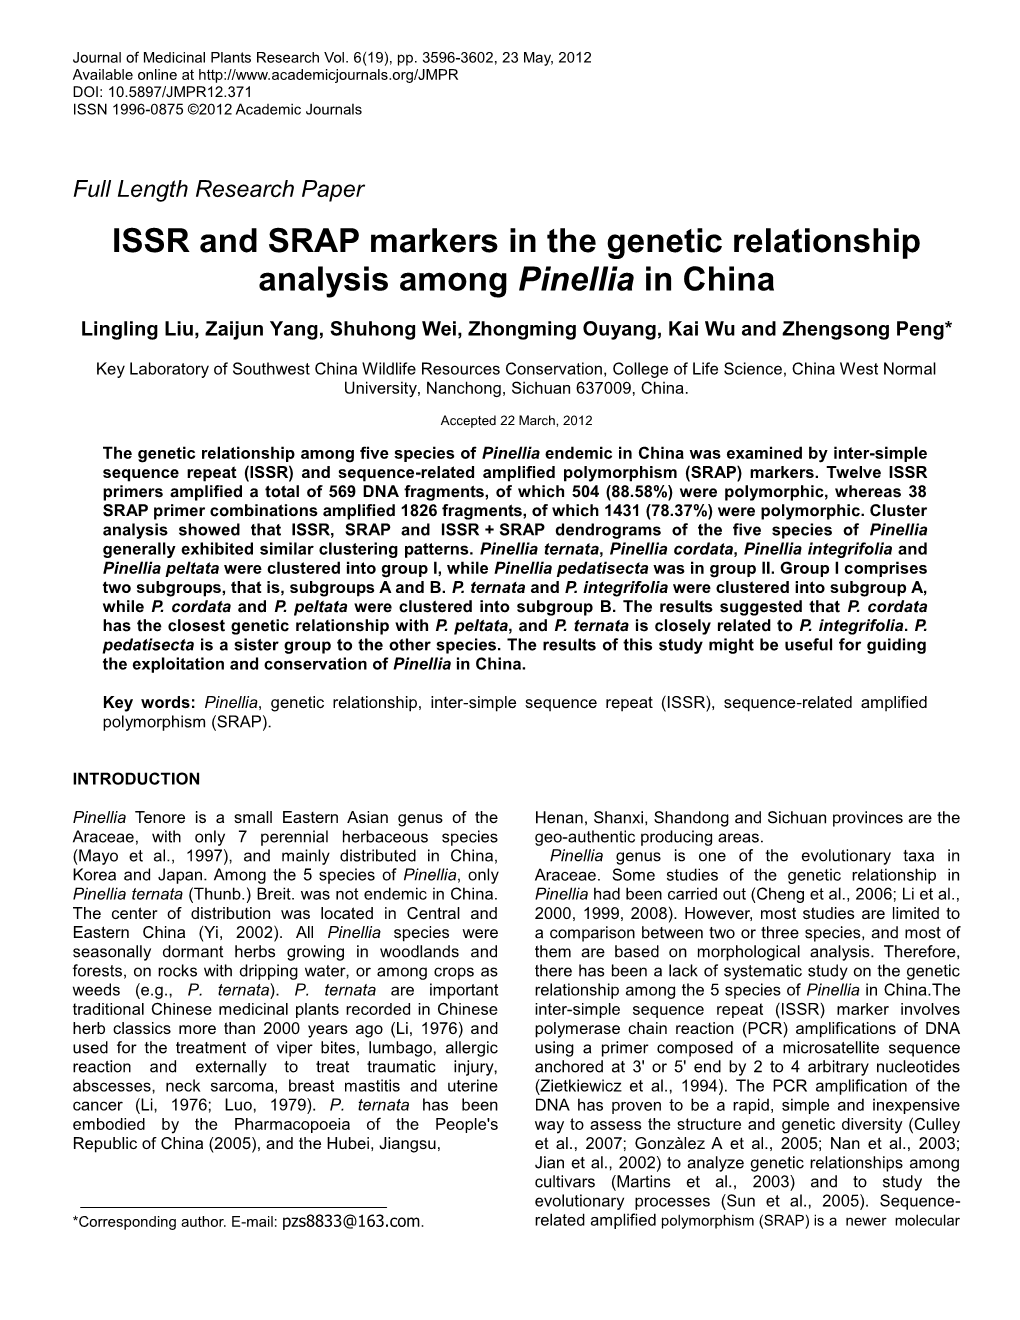 ISSR and SRAP Markers in the Genetic Relationship Analysis Among Pinellia in China